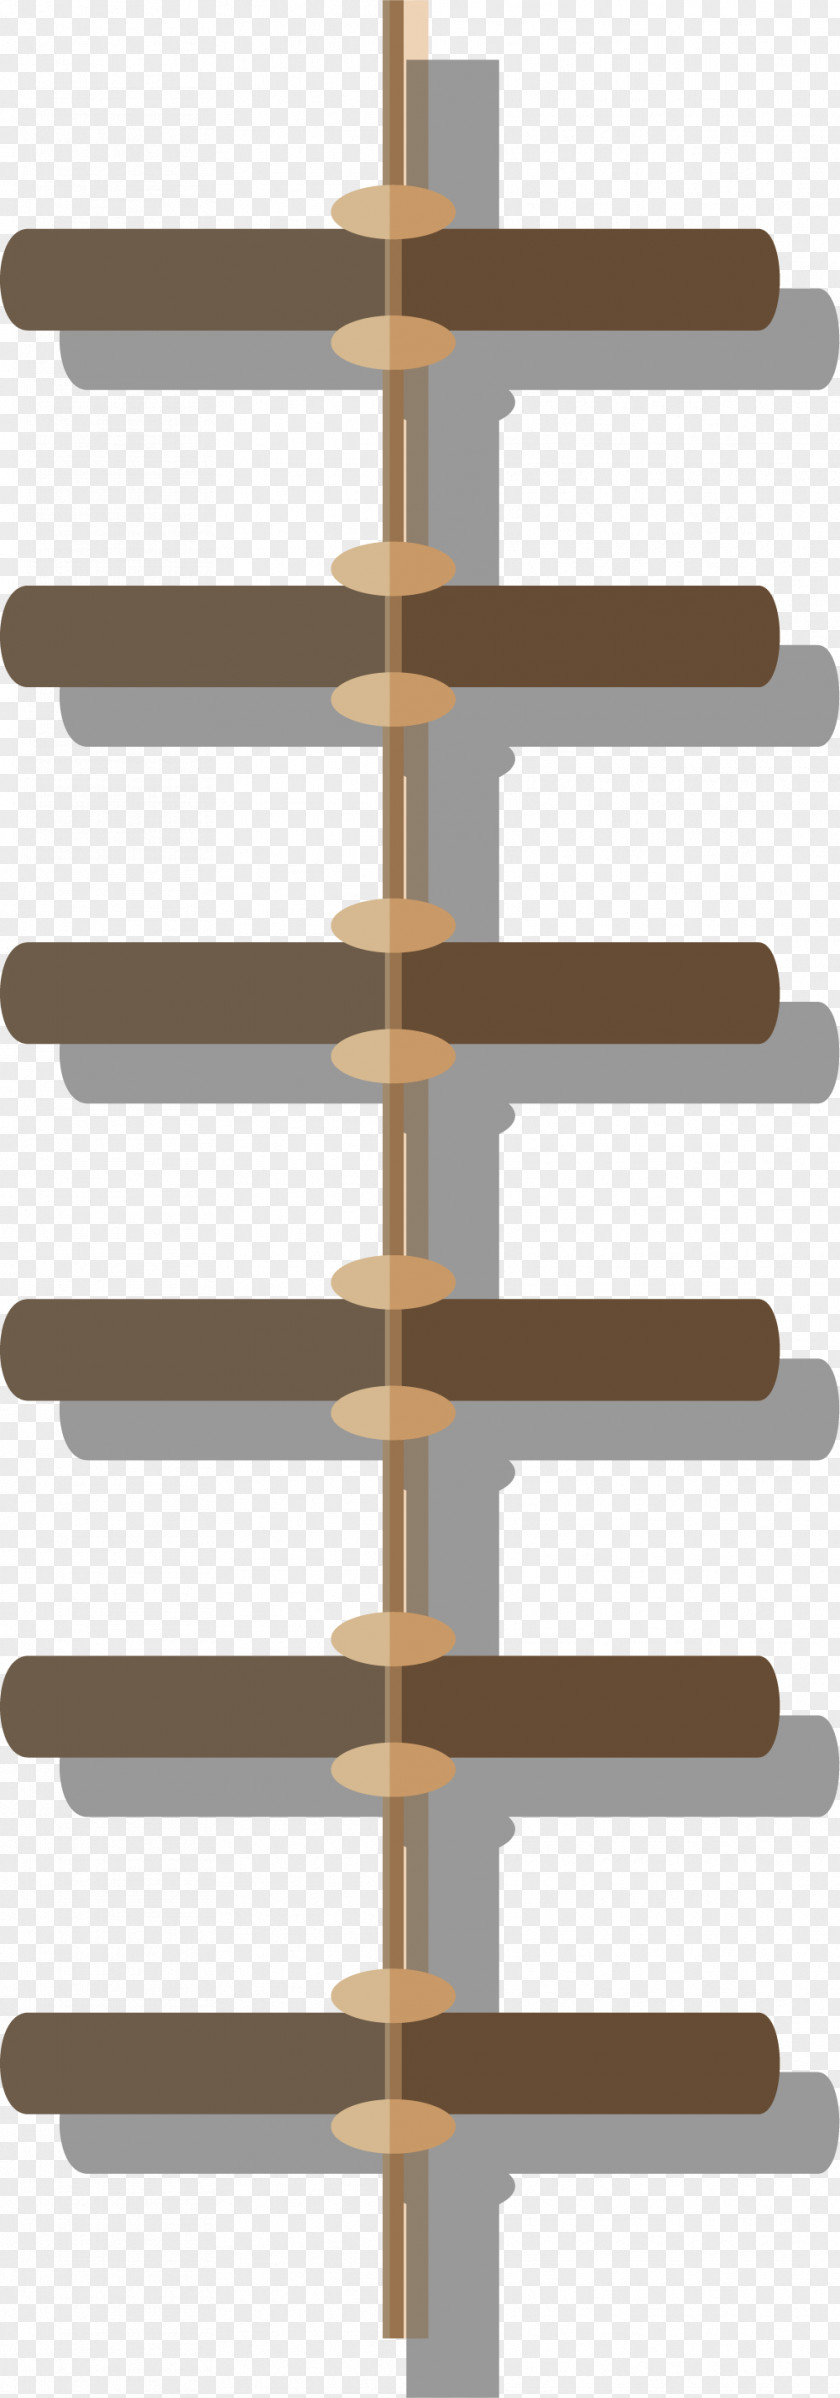 Brown Ladder Line Stairs Euclidean Vector PNG